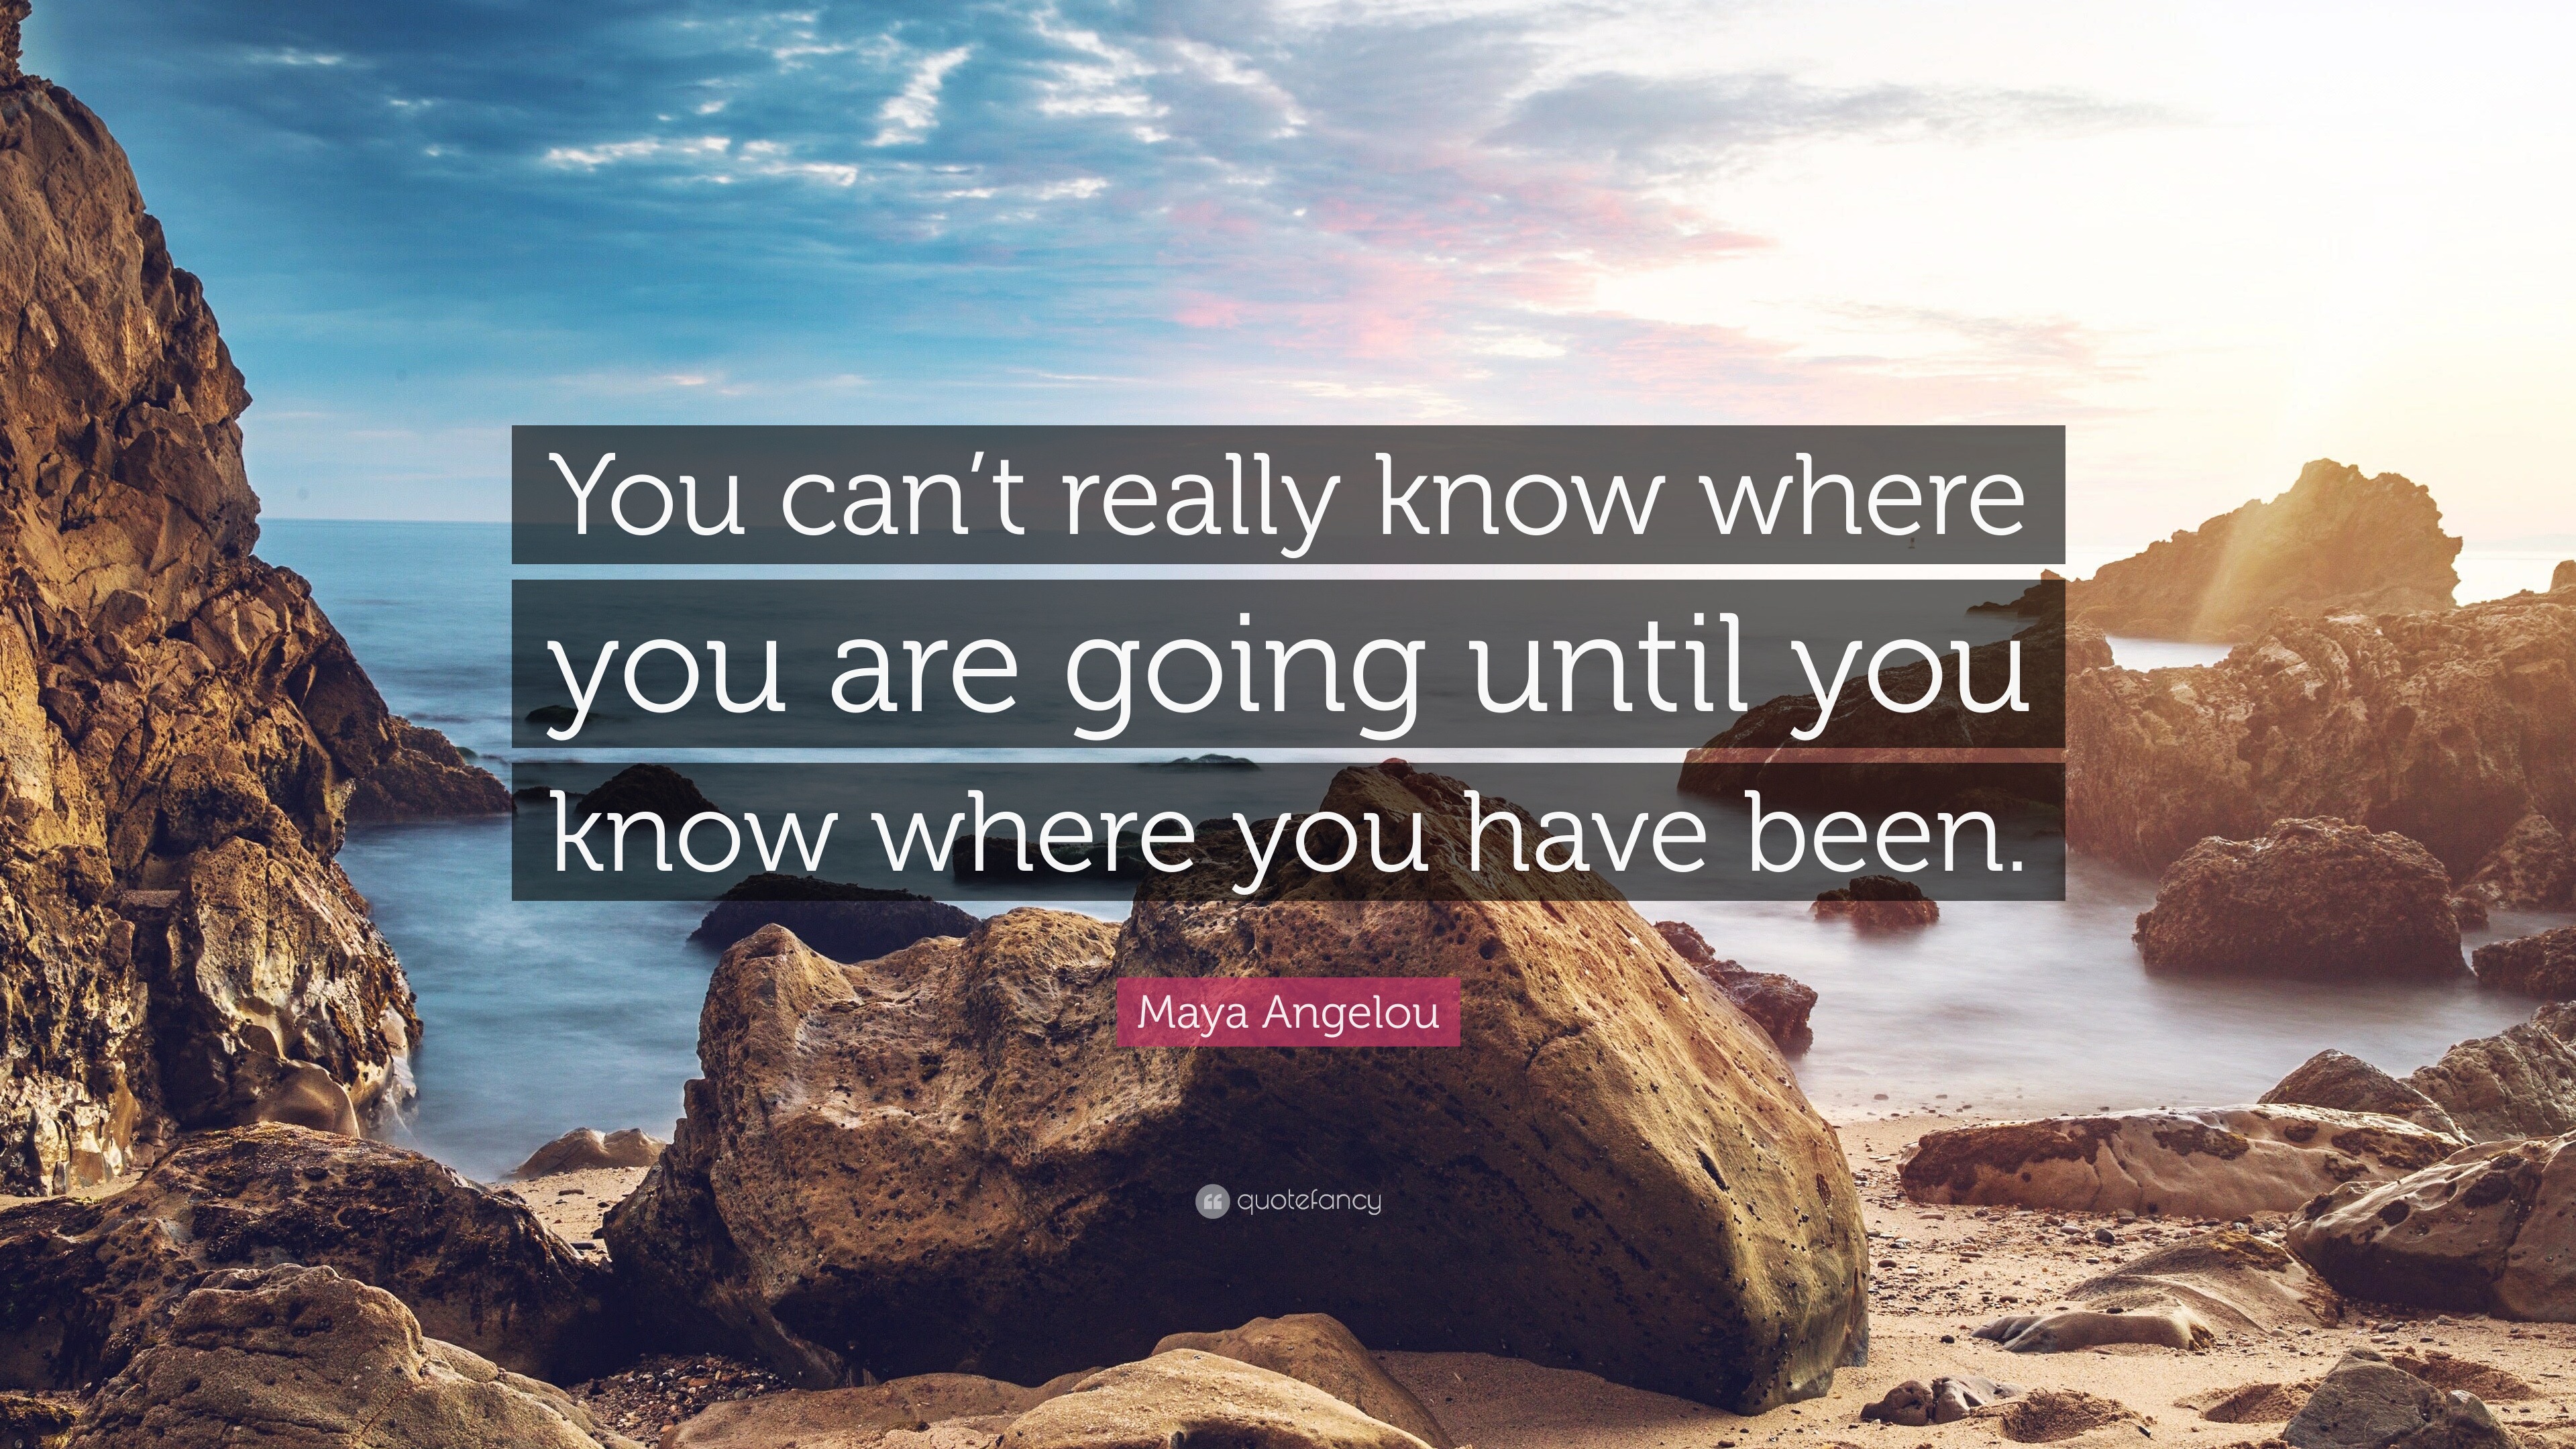 Maya Angelou Quote: “You can't really know where you are going until you  know where